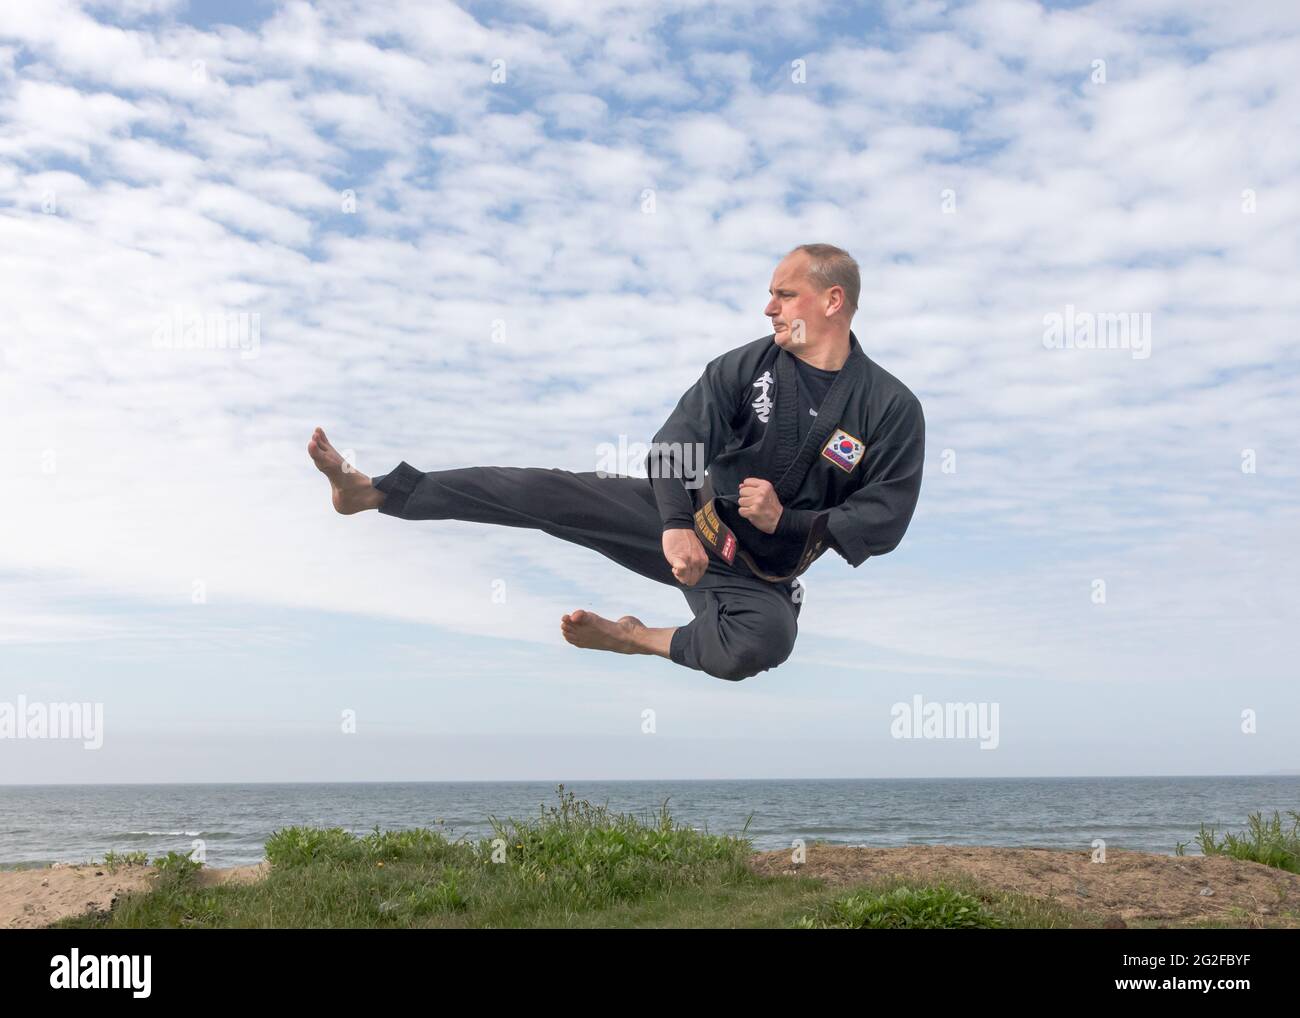 Garrylucas, Cork, Ireland. 11th June, 2021. Matthew Boniwell from Ballinspittle, a 5th degree black belt master in the Korean martial art of Kuk Sool Won, does some warm up exercises prior to conducting a keep fit class on the seafront at Garrylucas, Co. Cork, Ireland.   - Credit; David Creedon / Alamy Live News Stock Photo